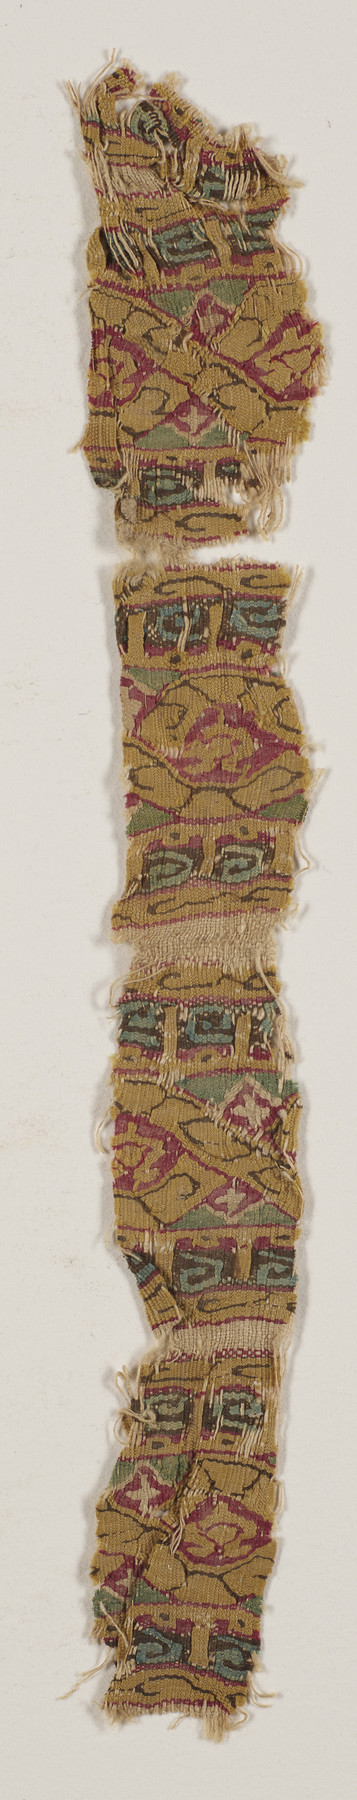 Image for Tiraz fragment with decorative bands and bird motifs